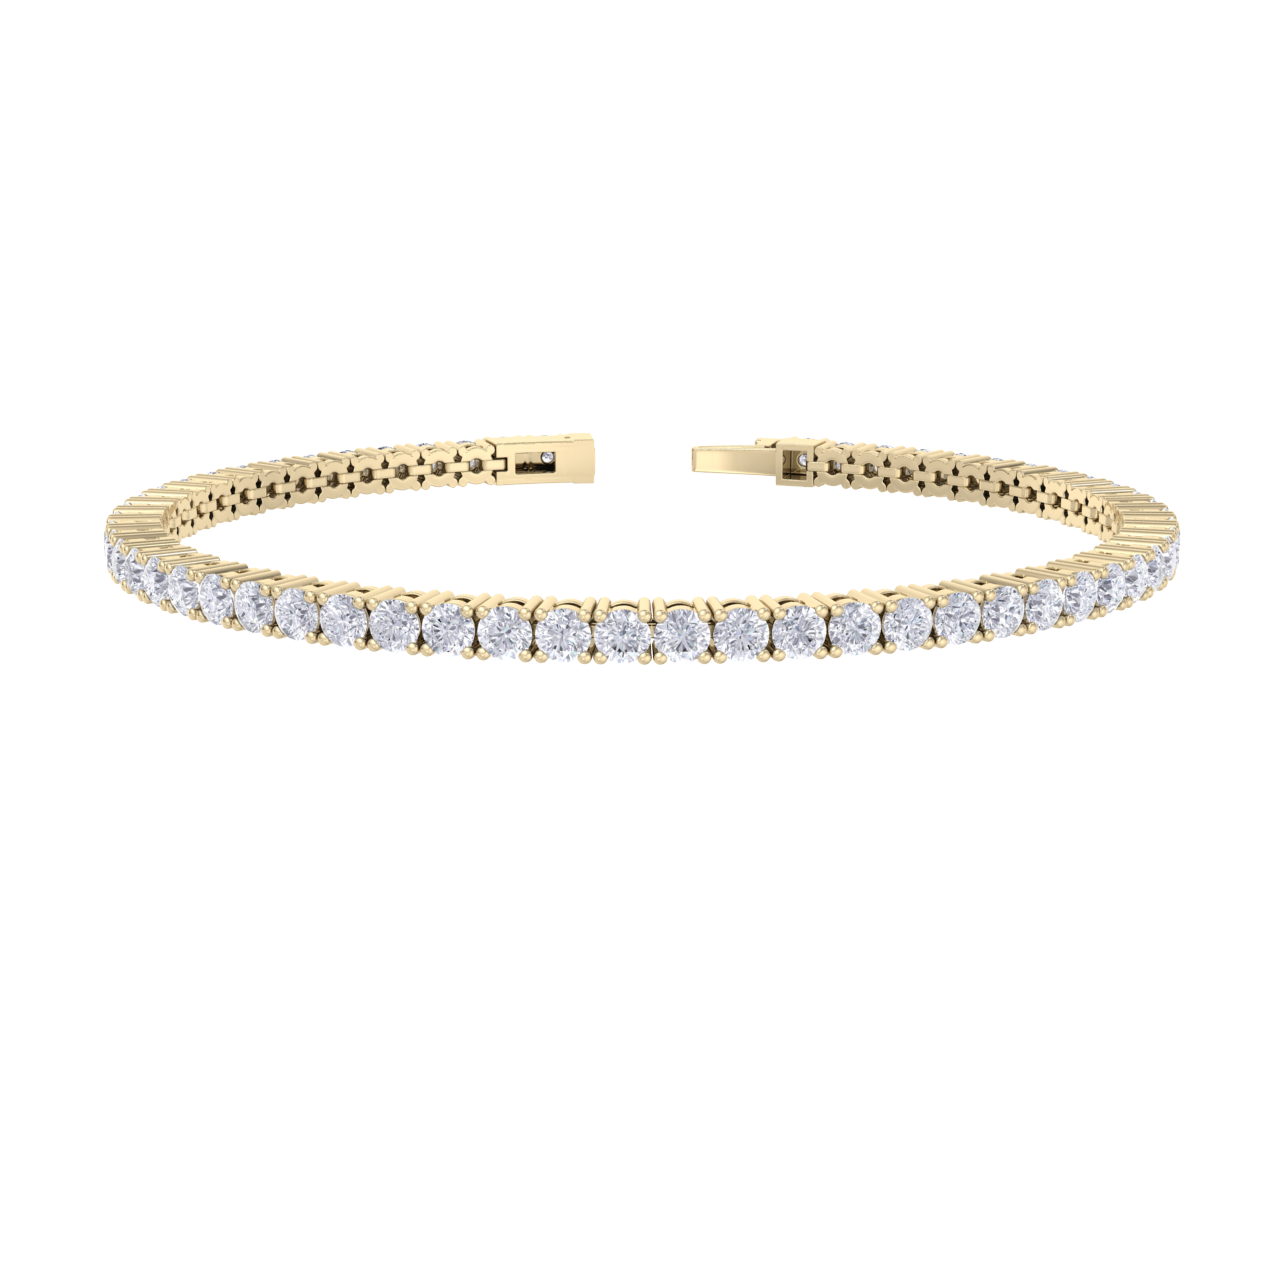 Elegant tennis bracelet with miracle plates in yellow with white diamonds of 5.00 ct in weight